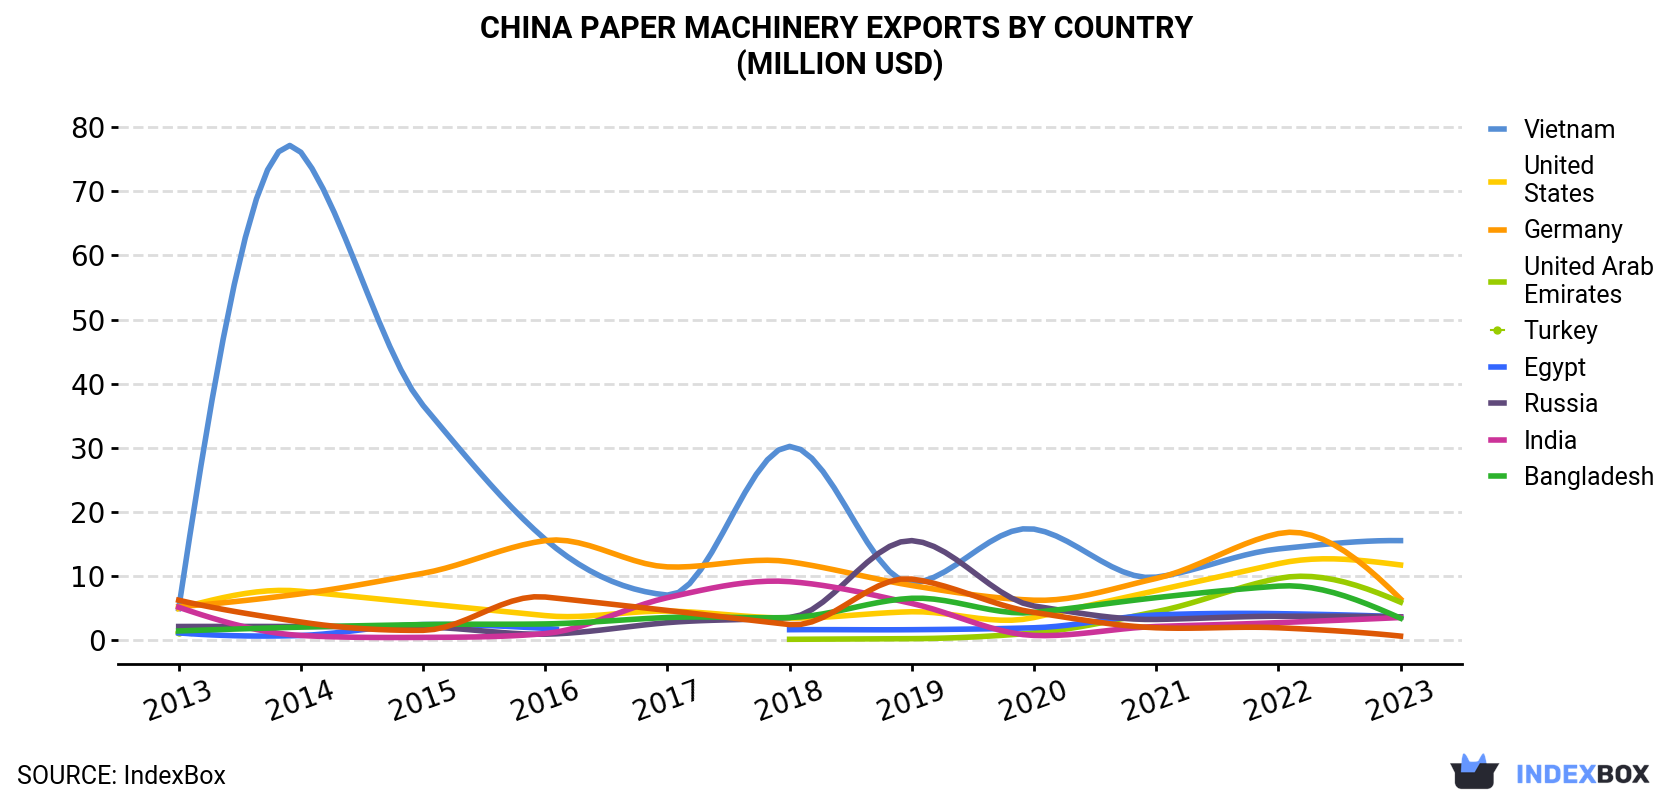 China Paper Machinery Exports By Country (Million USD)